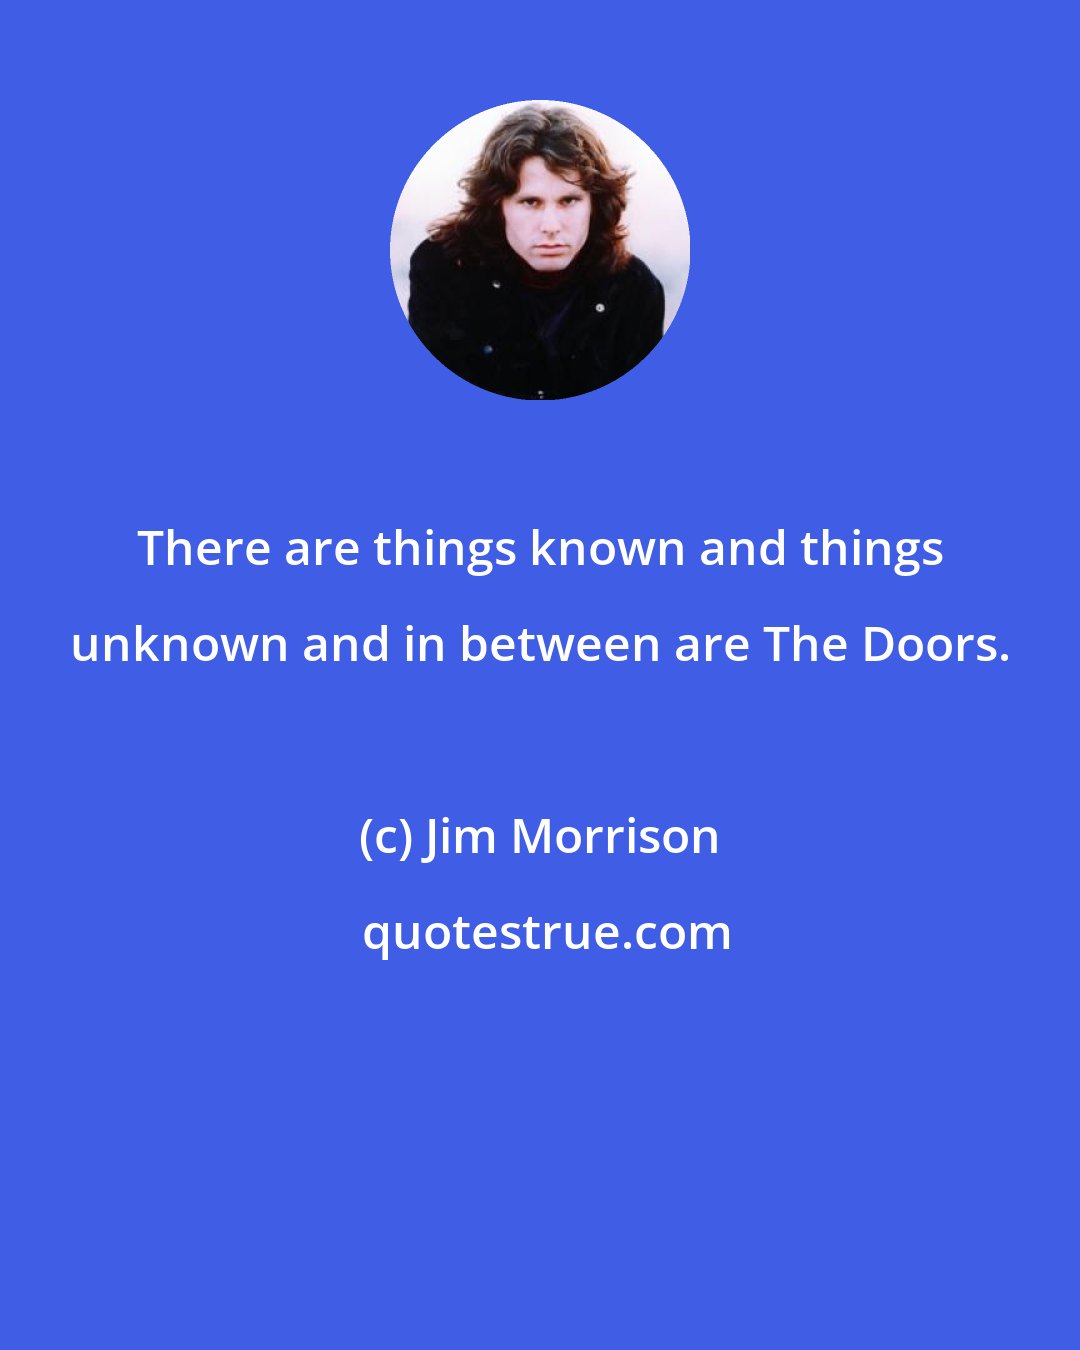 Jim Morrison: There are things known and things unknown and in between are The Doors.